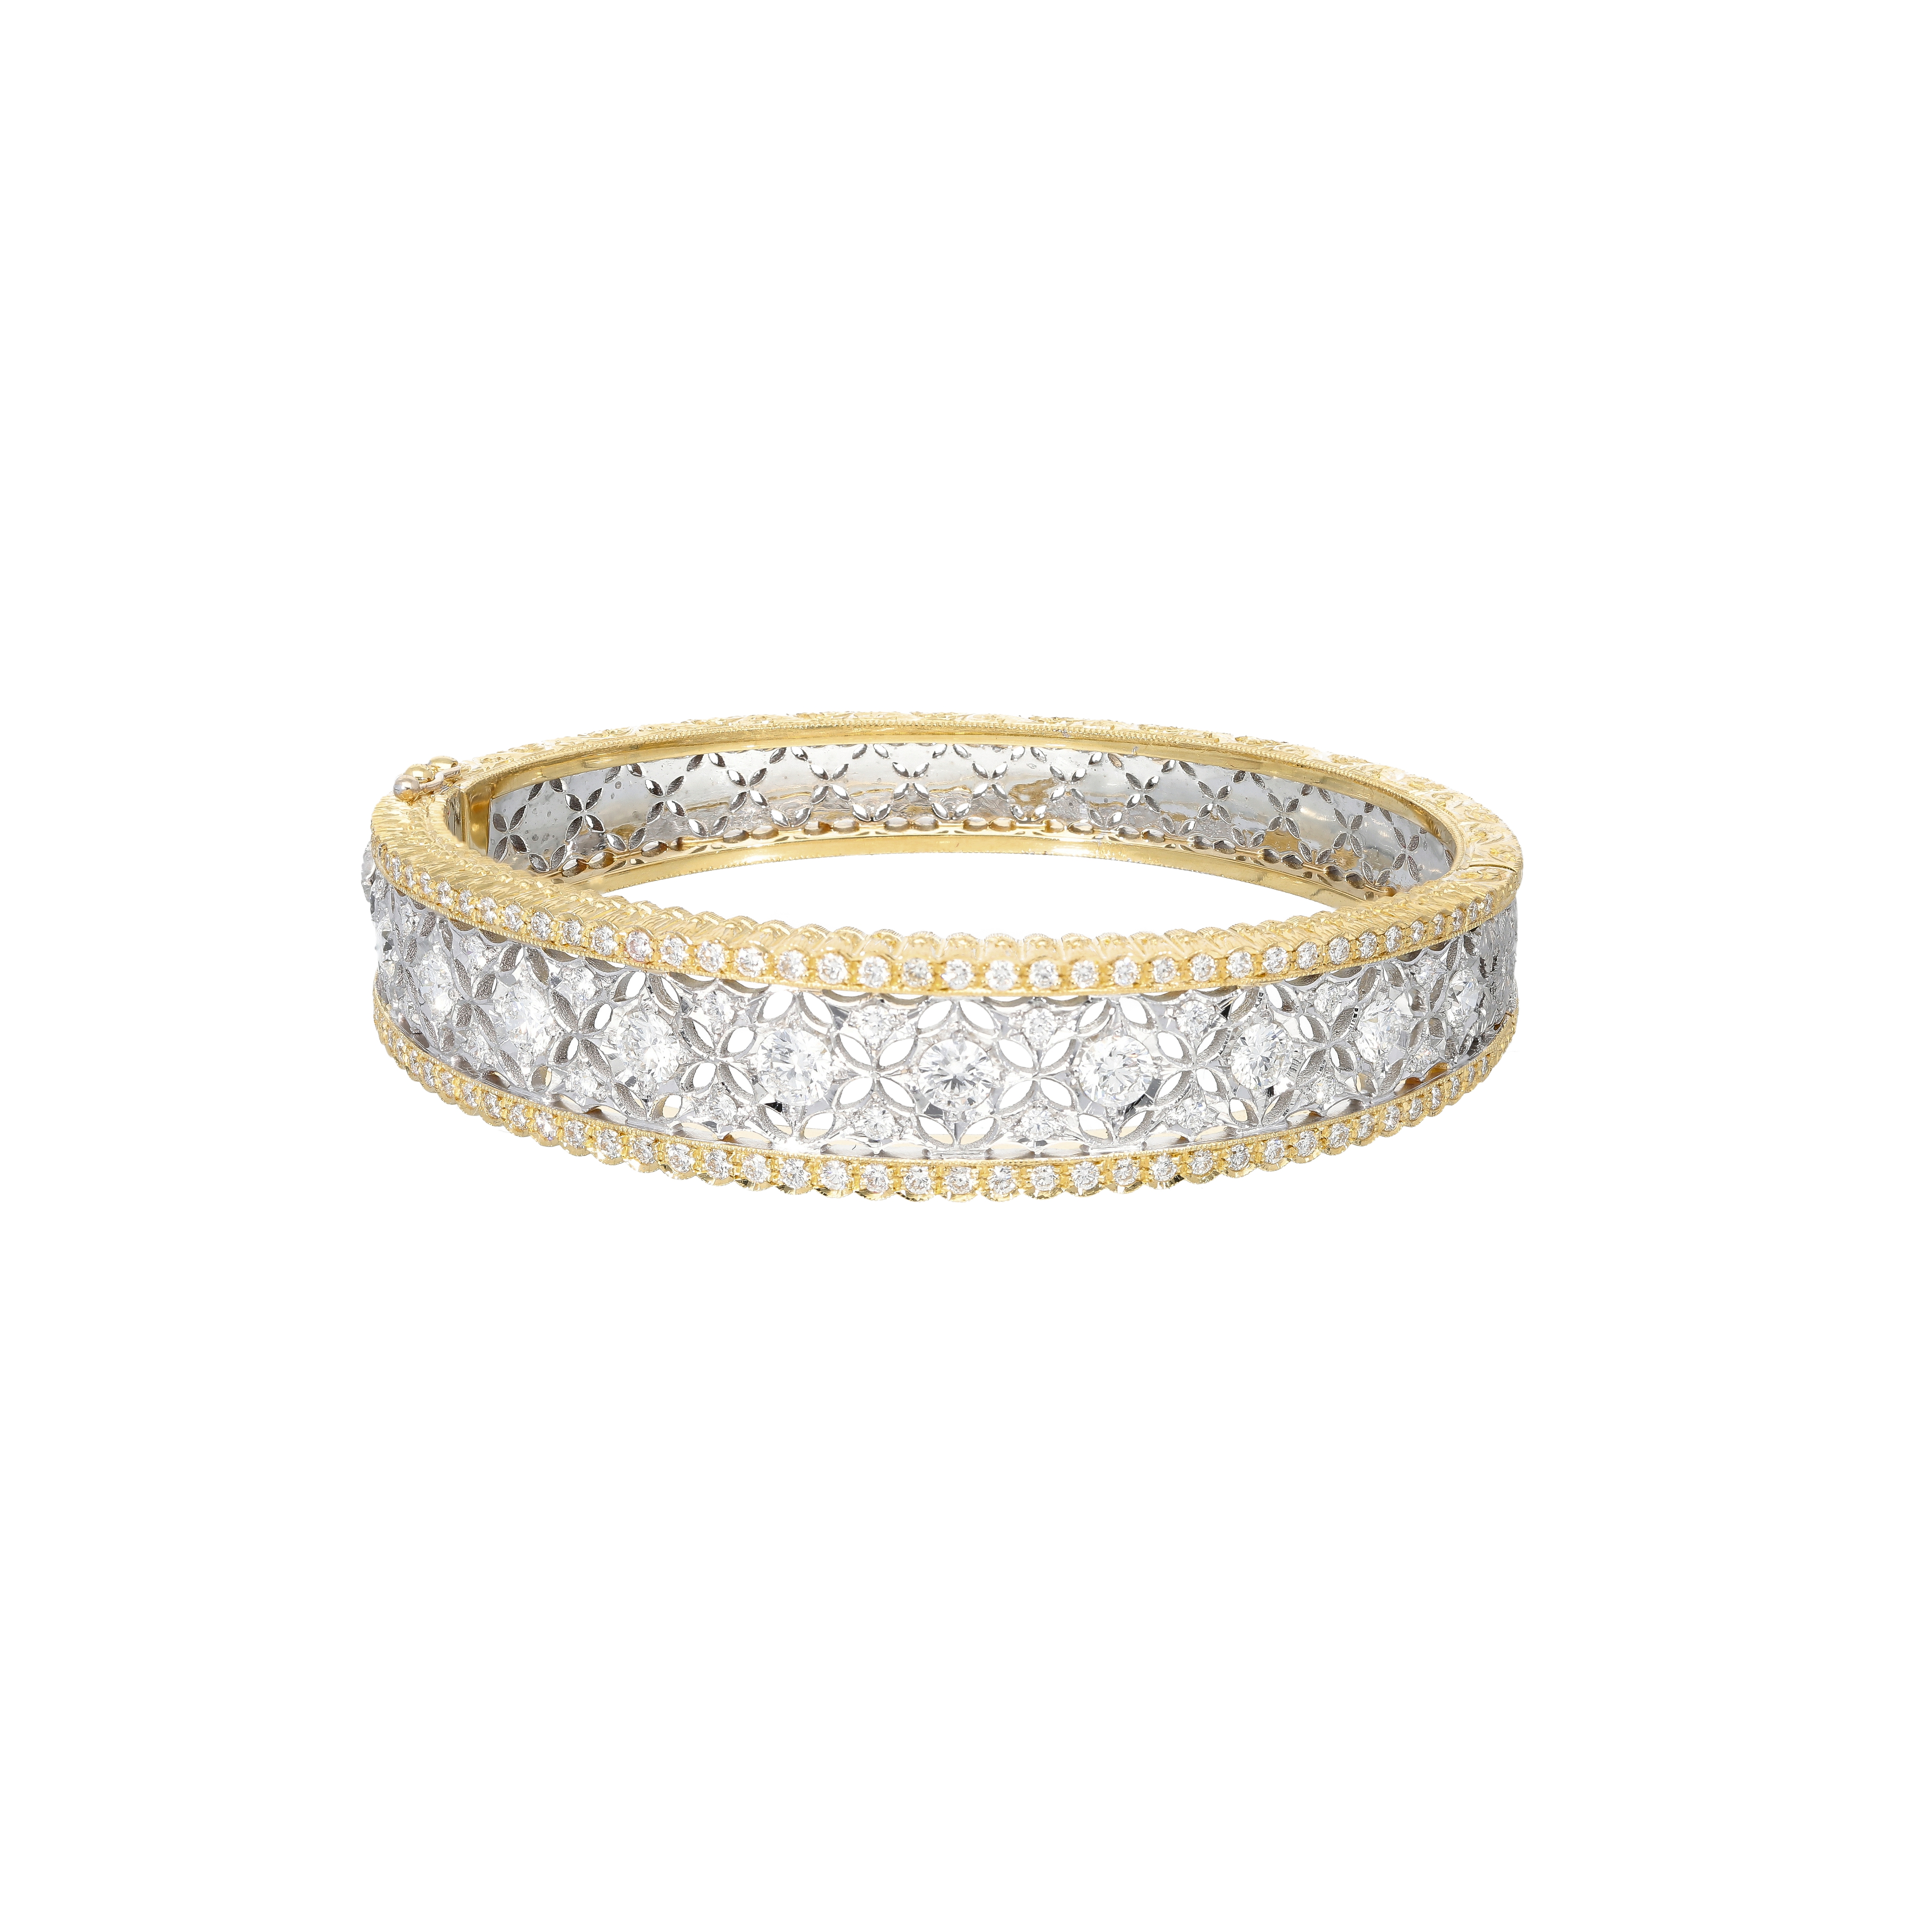 traditional florentine Bracelet with diamonds in 18kt yellow and white gold